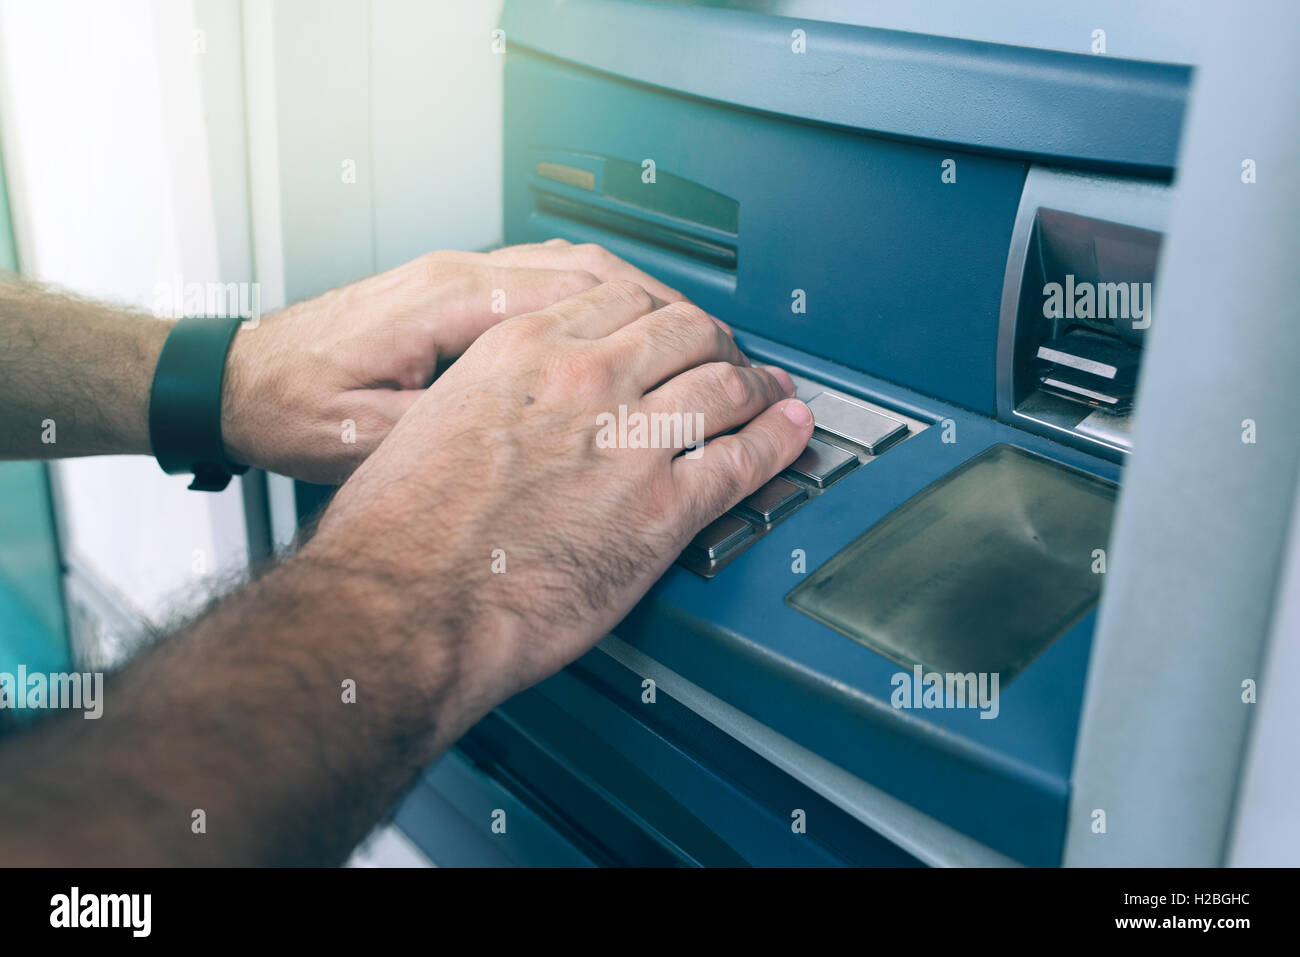 Hands typing PIN at ATM machine for cash money withdrawal Stock Photo